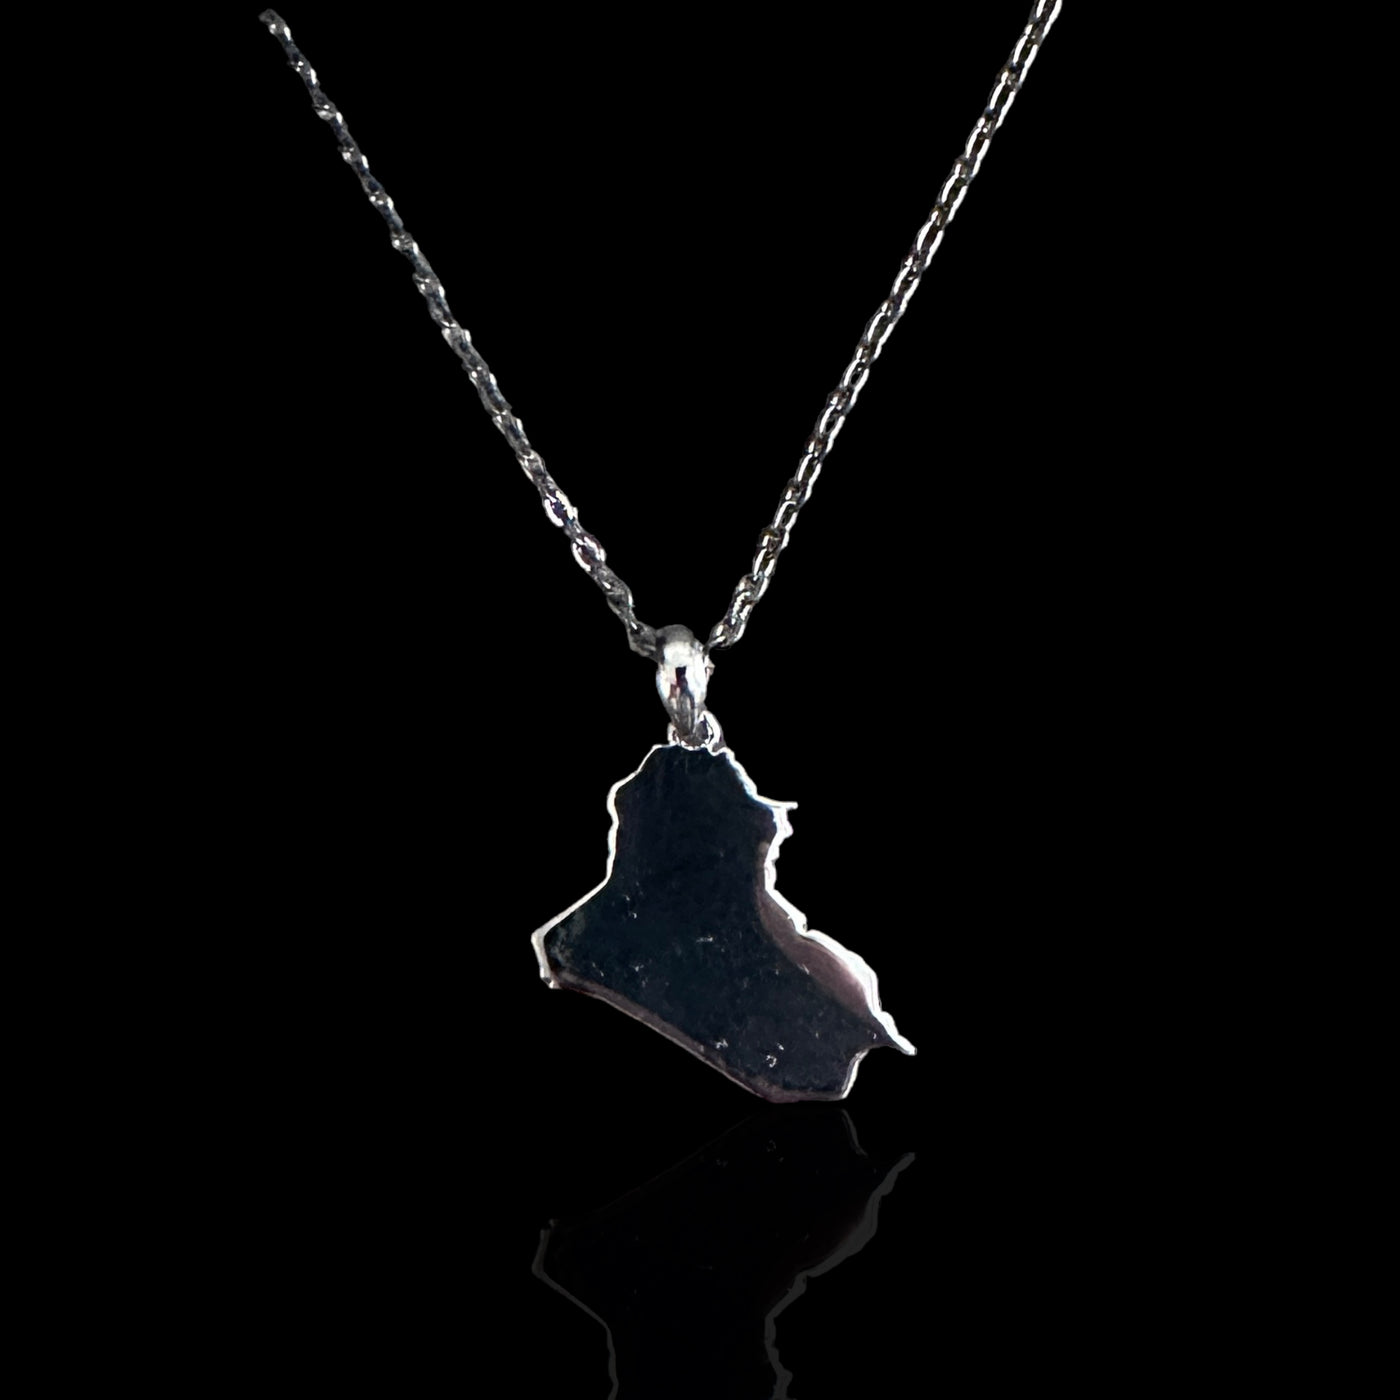 Sterling Silver Iraq Map Necklace - Available in 3 Colors